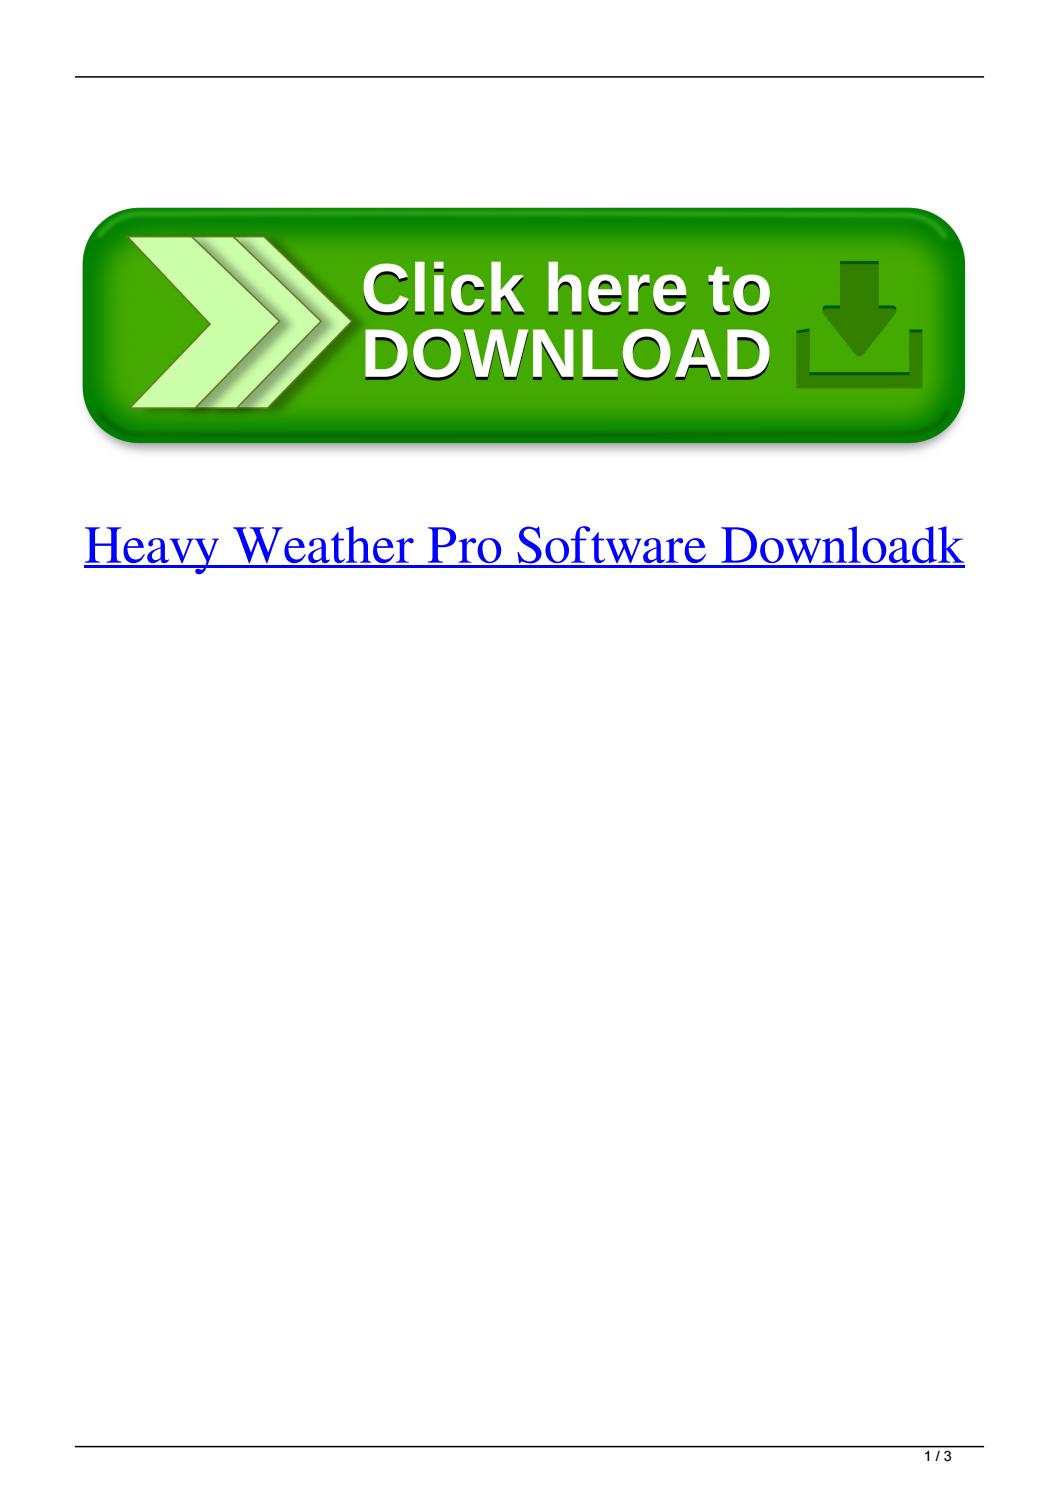 Heavy Weather Pro Software Download